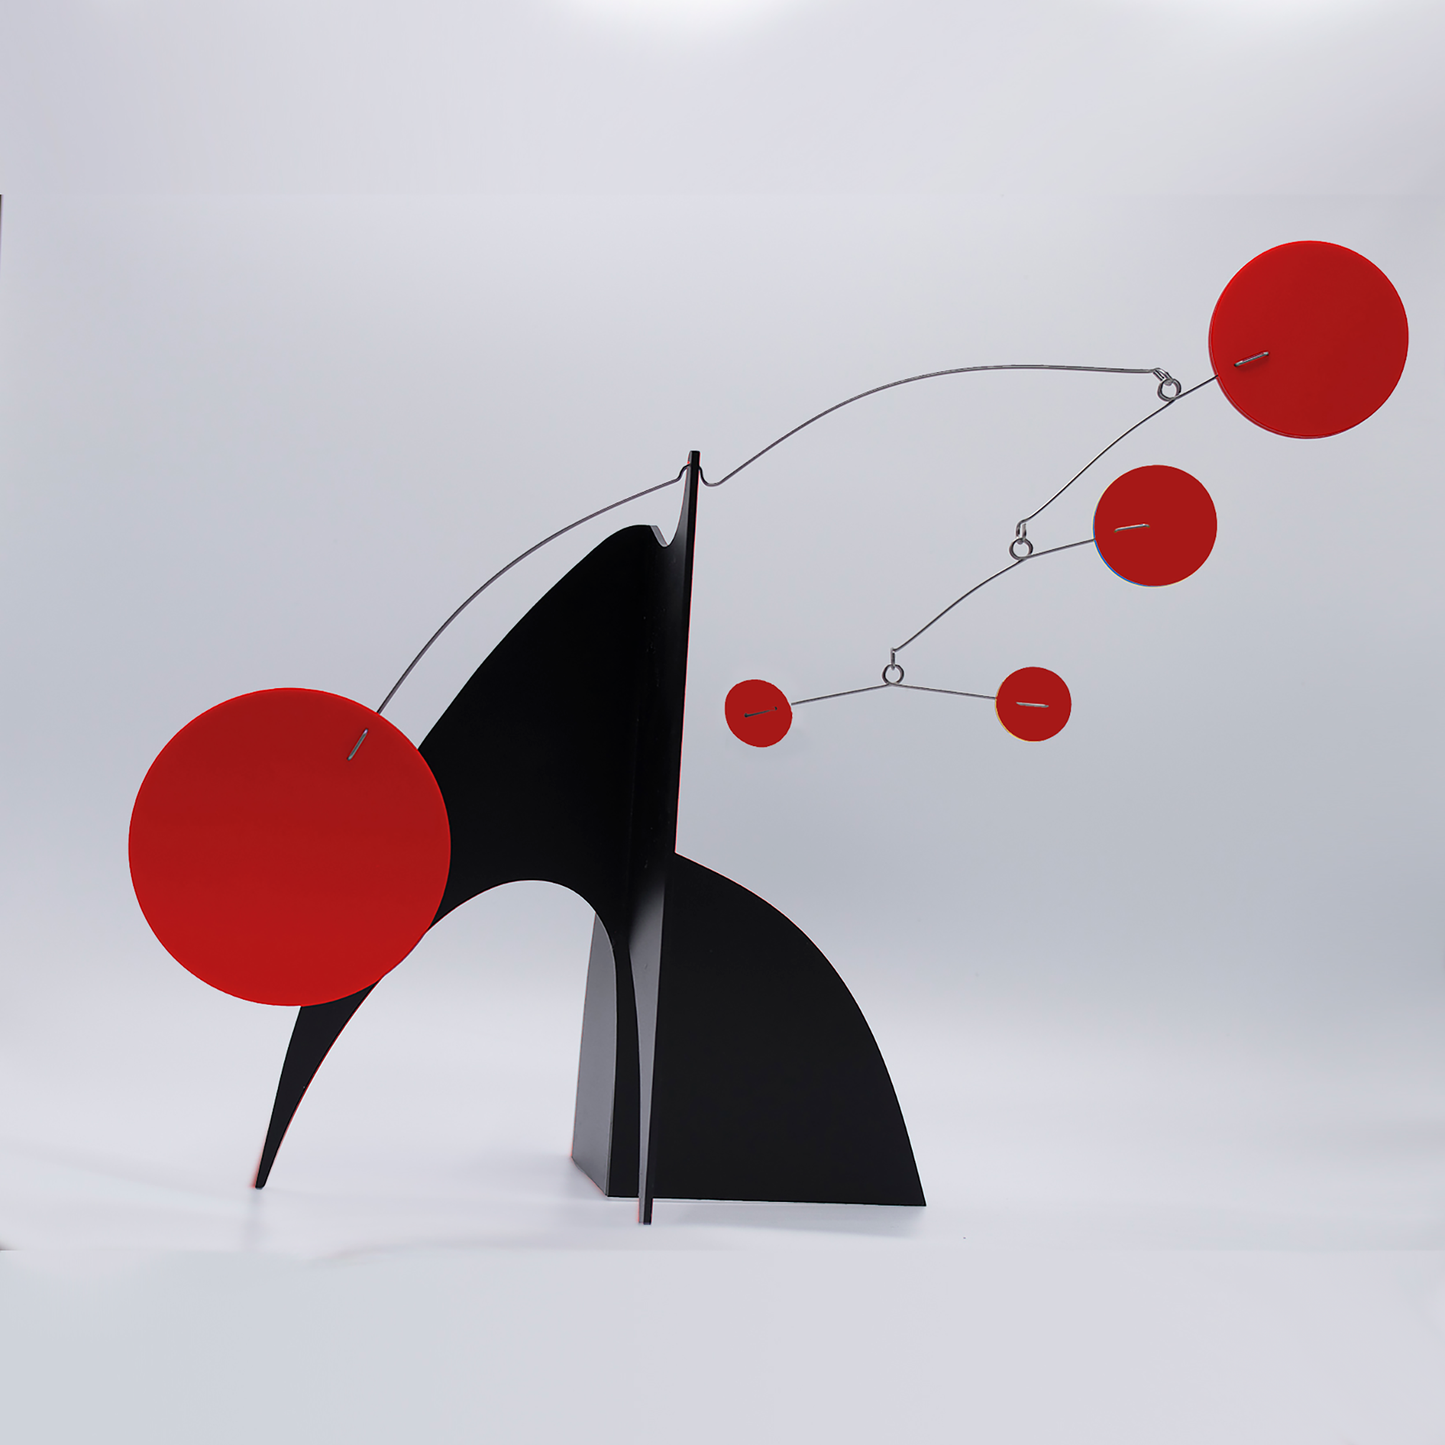 Beautiful Moderne Art Stabile in black and red - mid century modern inspired abstract modern art - tabletop kinetic art sculpture mobiles hand made with glossy plexiglass acrylic in Los Angeles by Debra Ann of AtomicMobiles.com